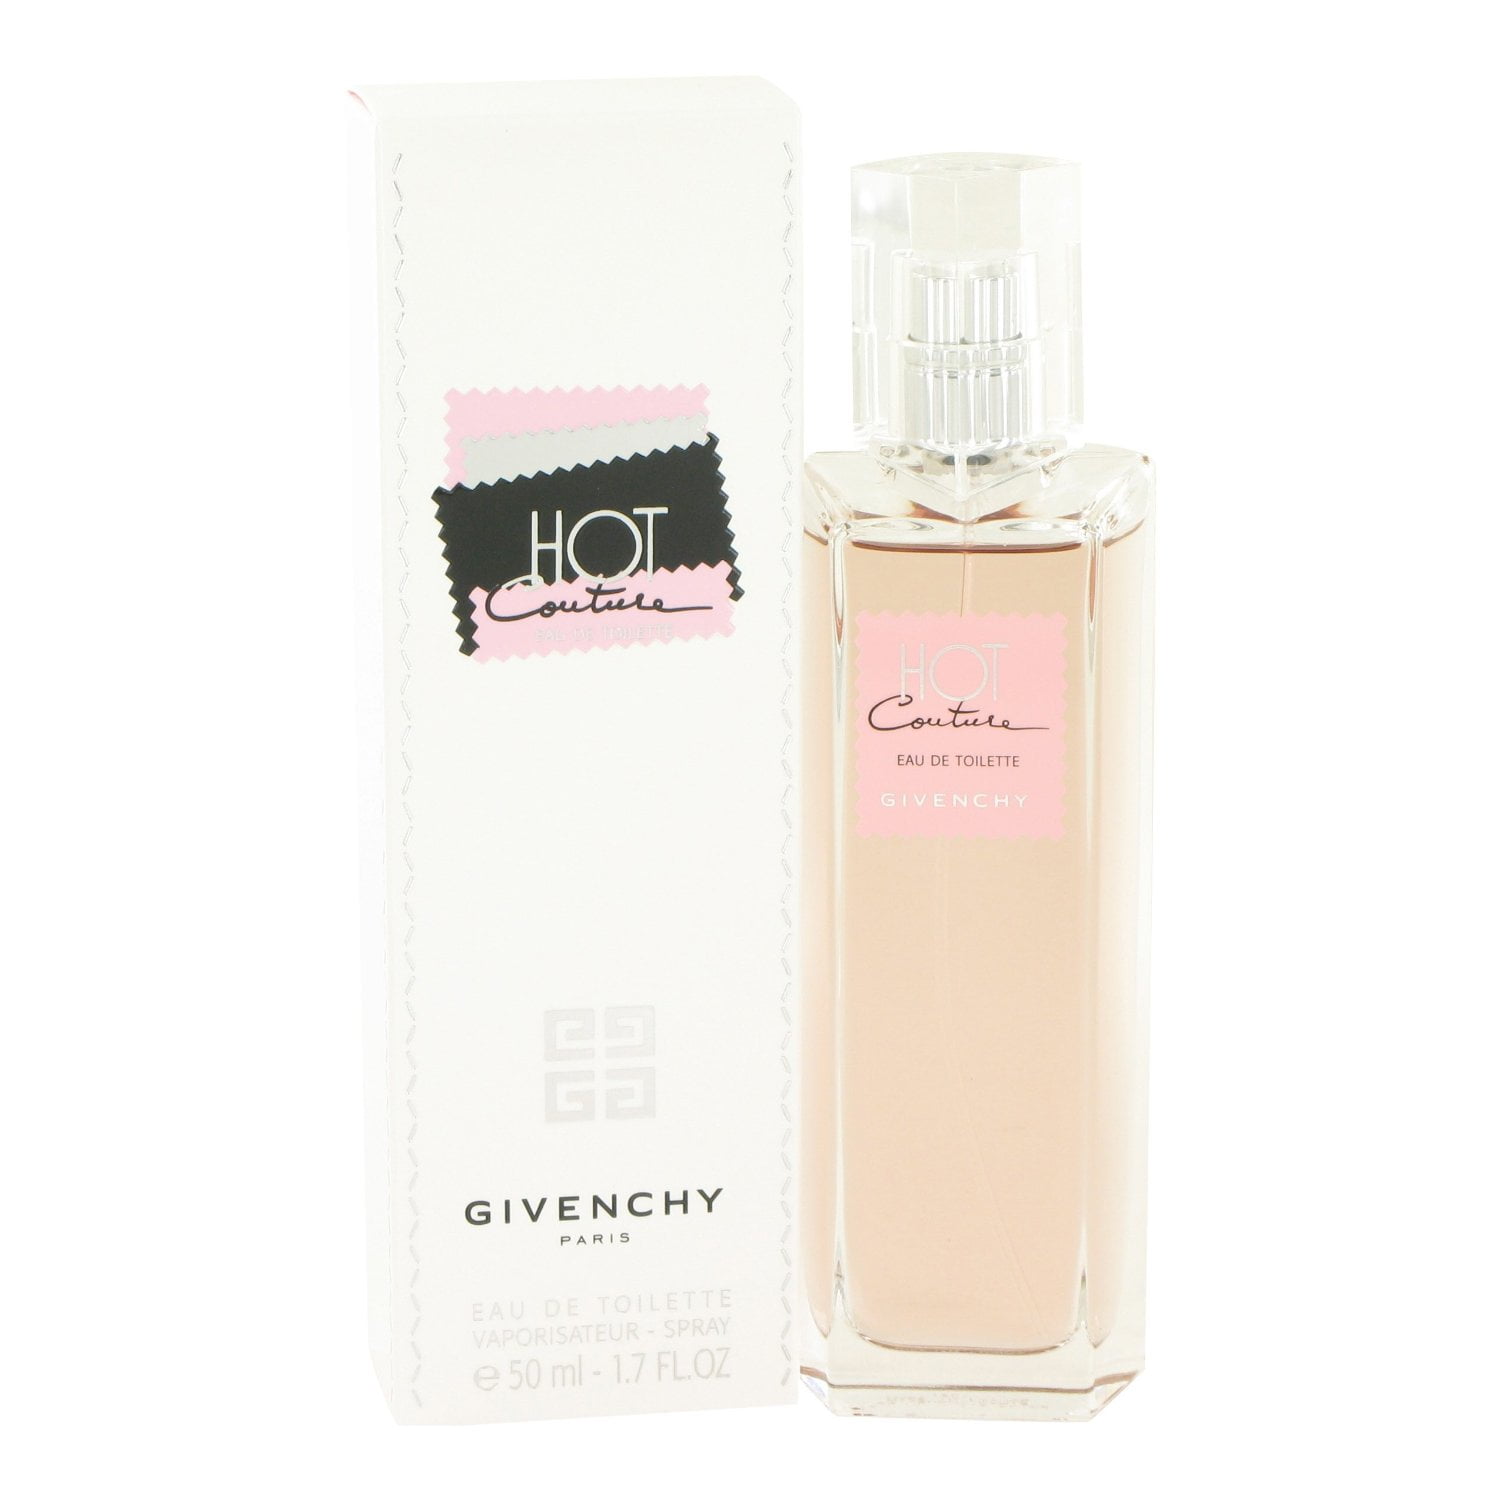 Hot Couture by Givenchy 50ml edt - Perfume Bargains Plus